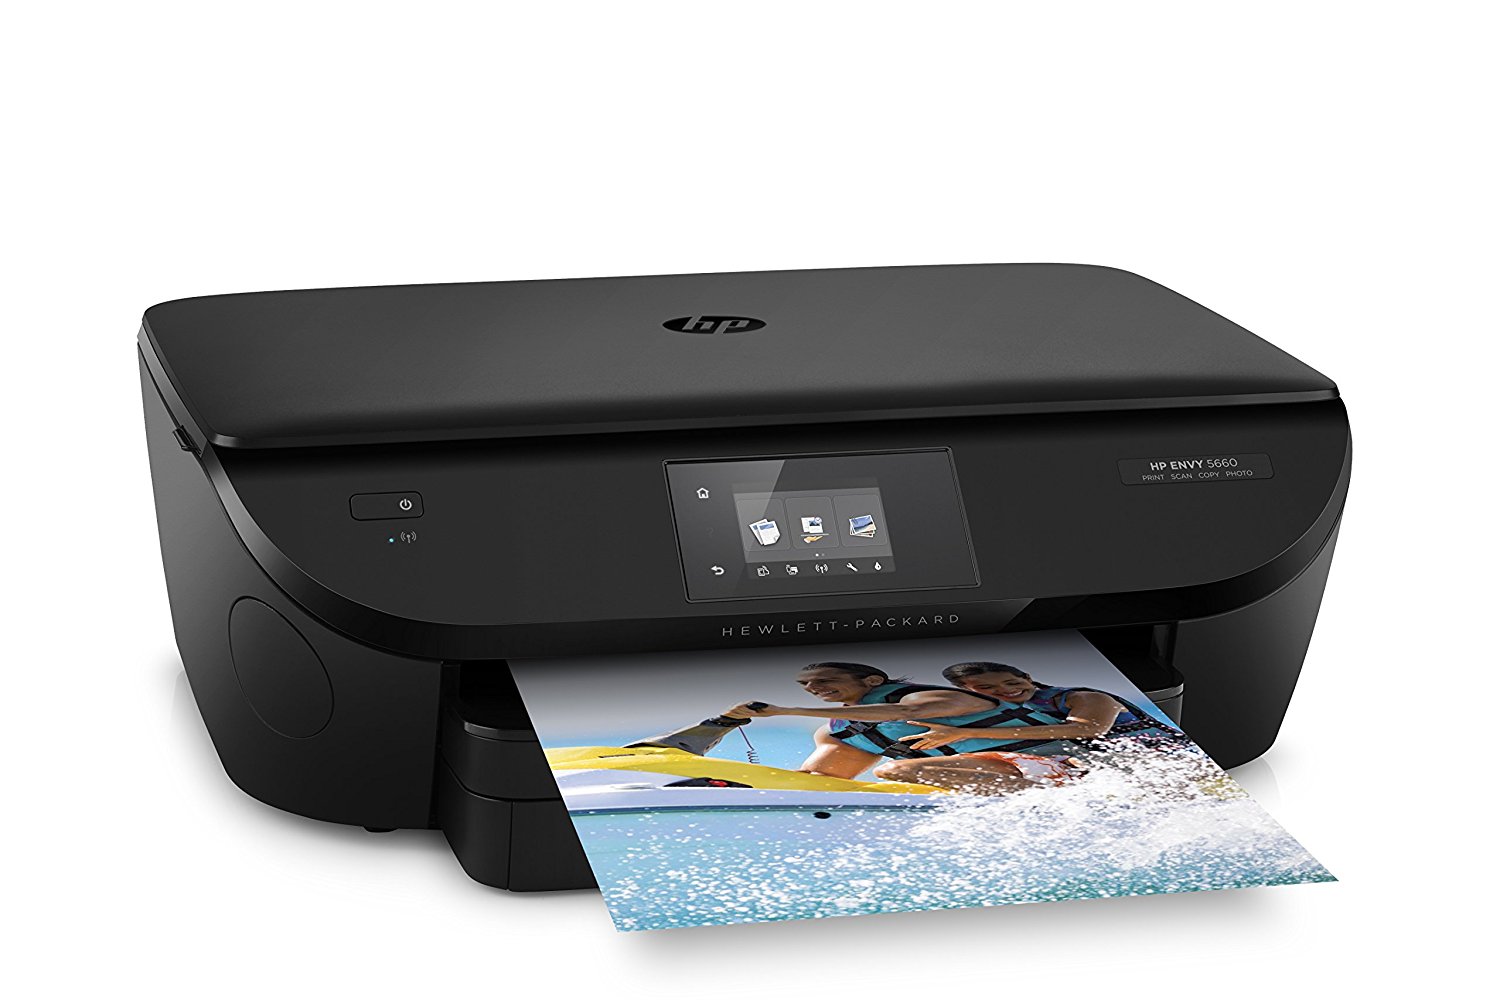 Hp Envy 5660 Wireless All In One Inkjet Printer And Ink Bundle N3 Free Image Download 9864